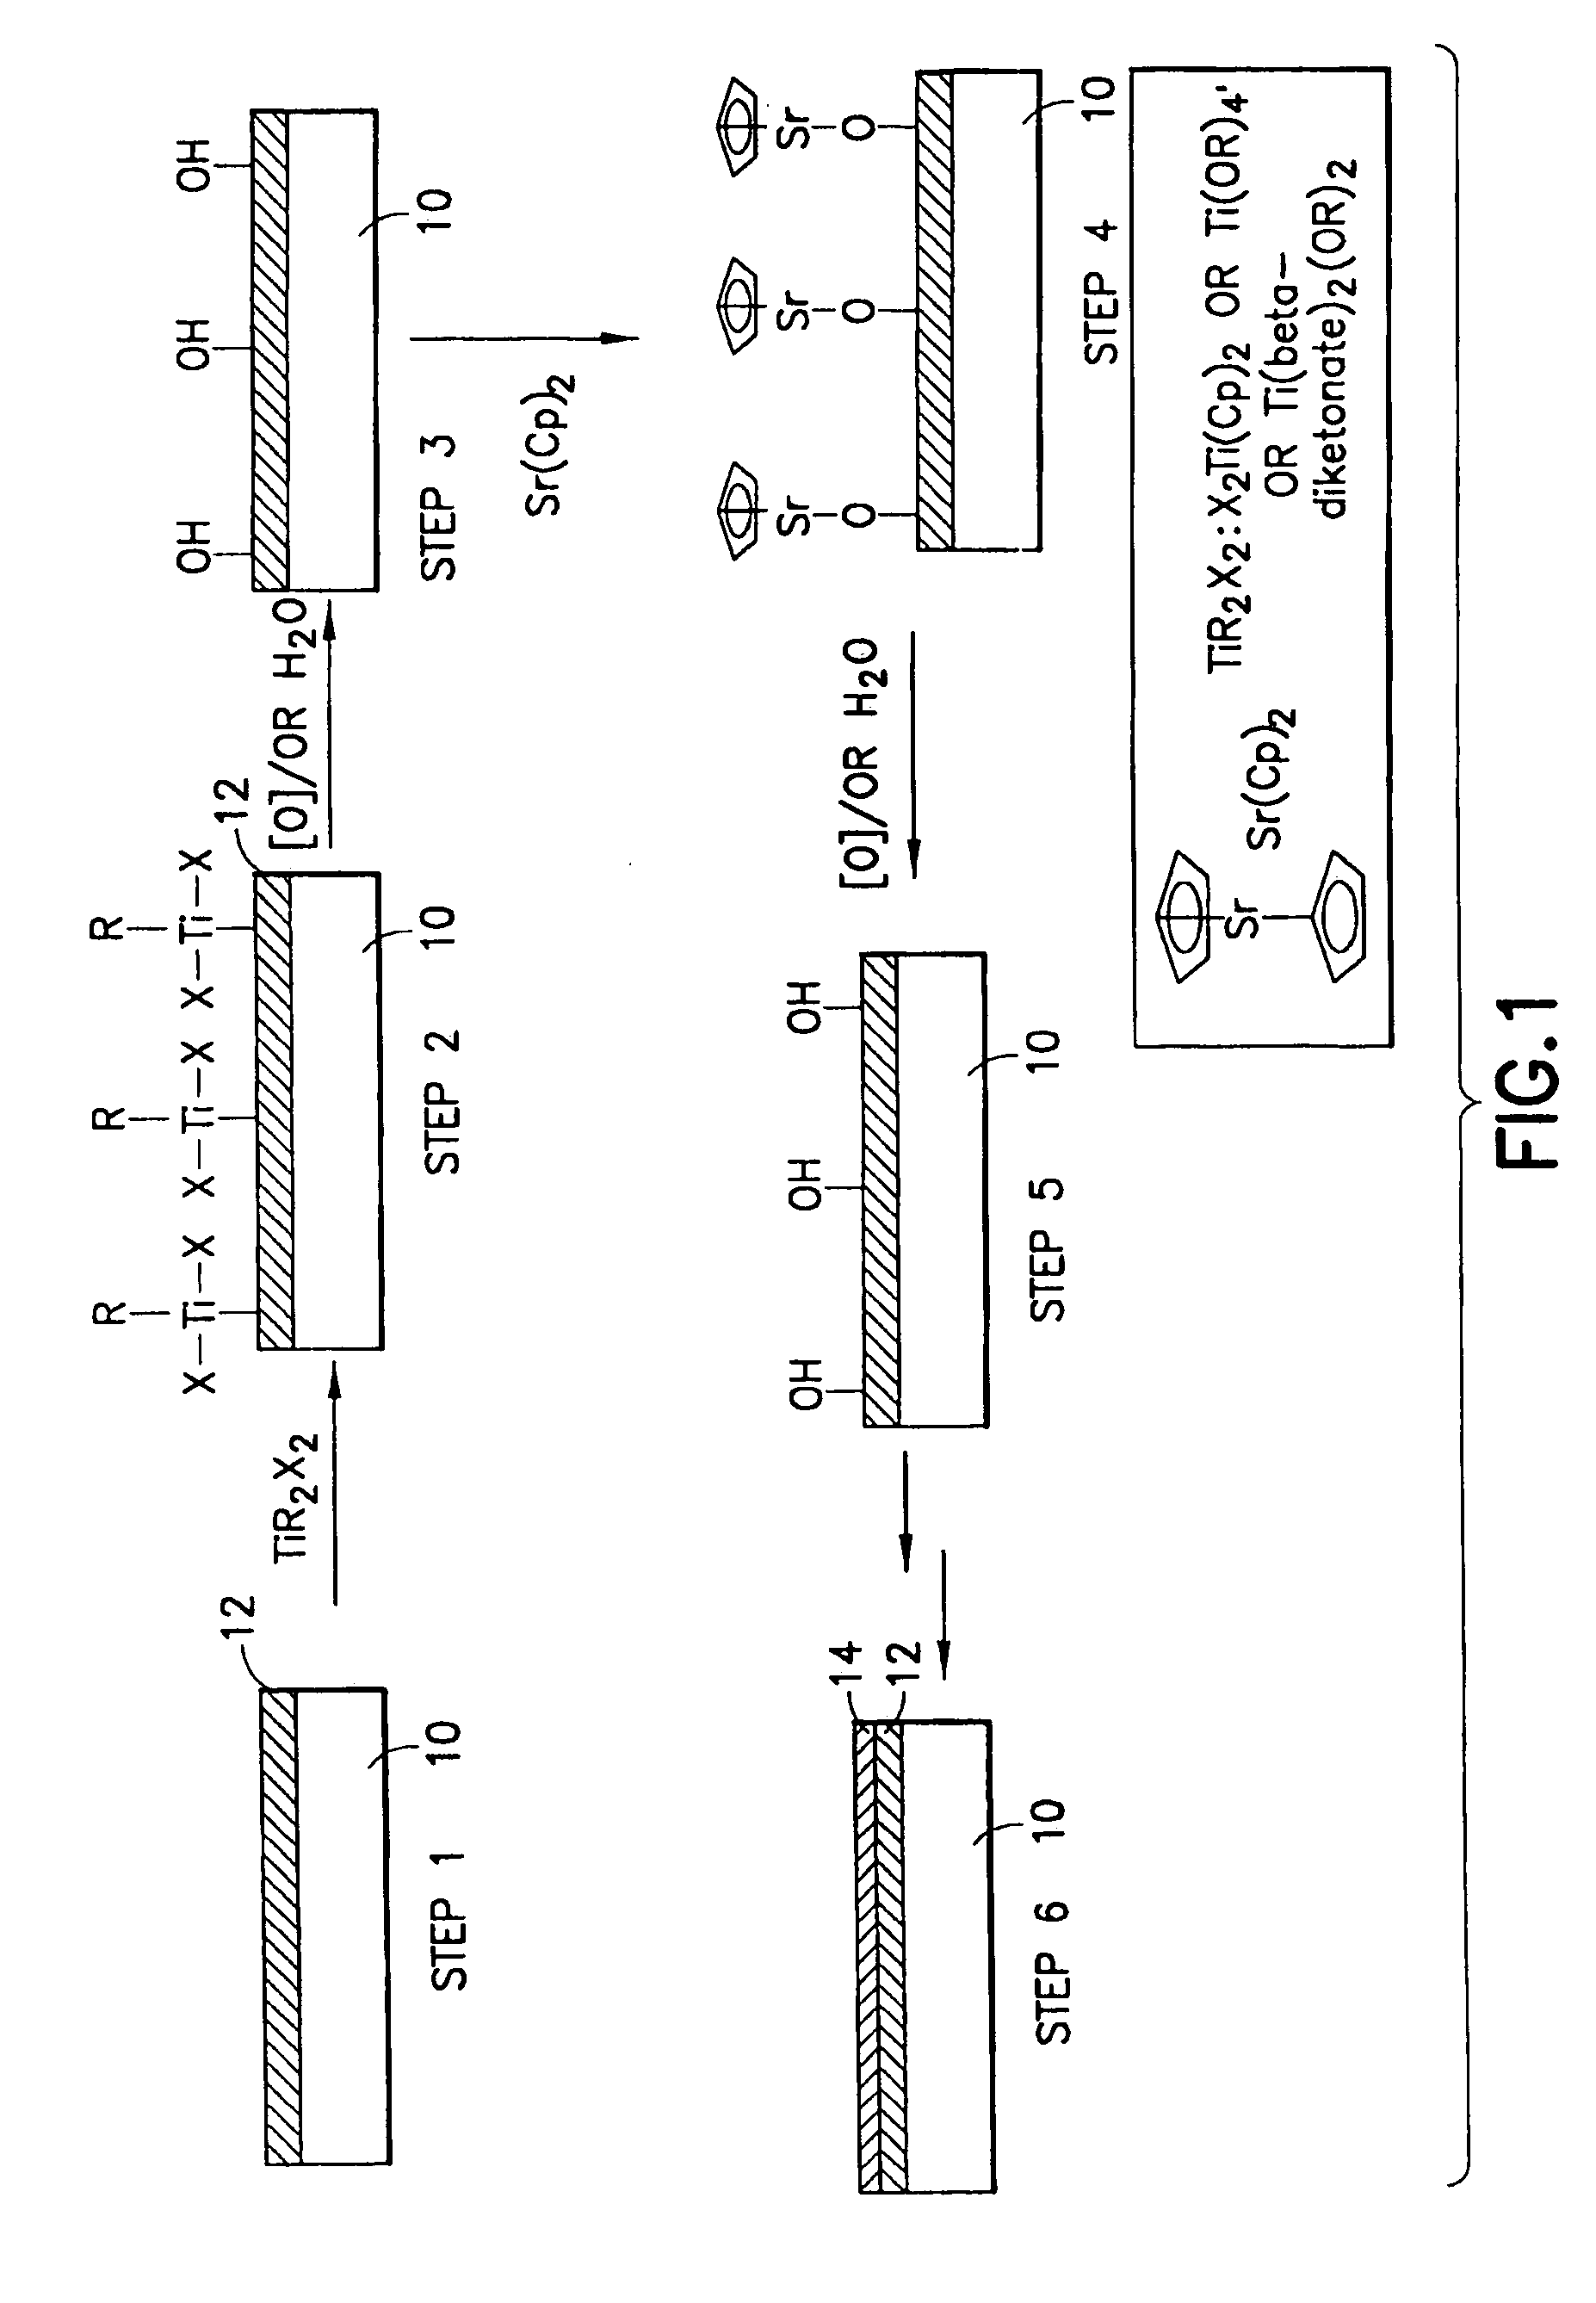 Precursor compositions for atomic layer deposition and chemical vapor deposition of titanate, lanthanate, and tantalate dielectric films